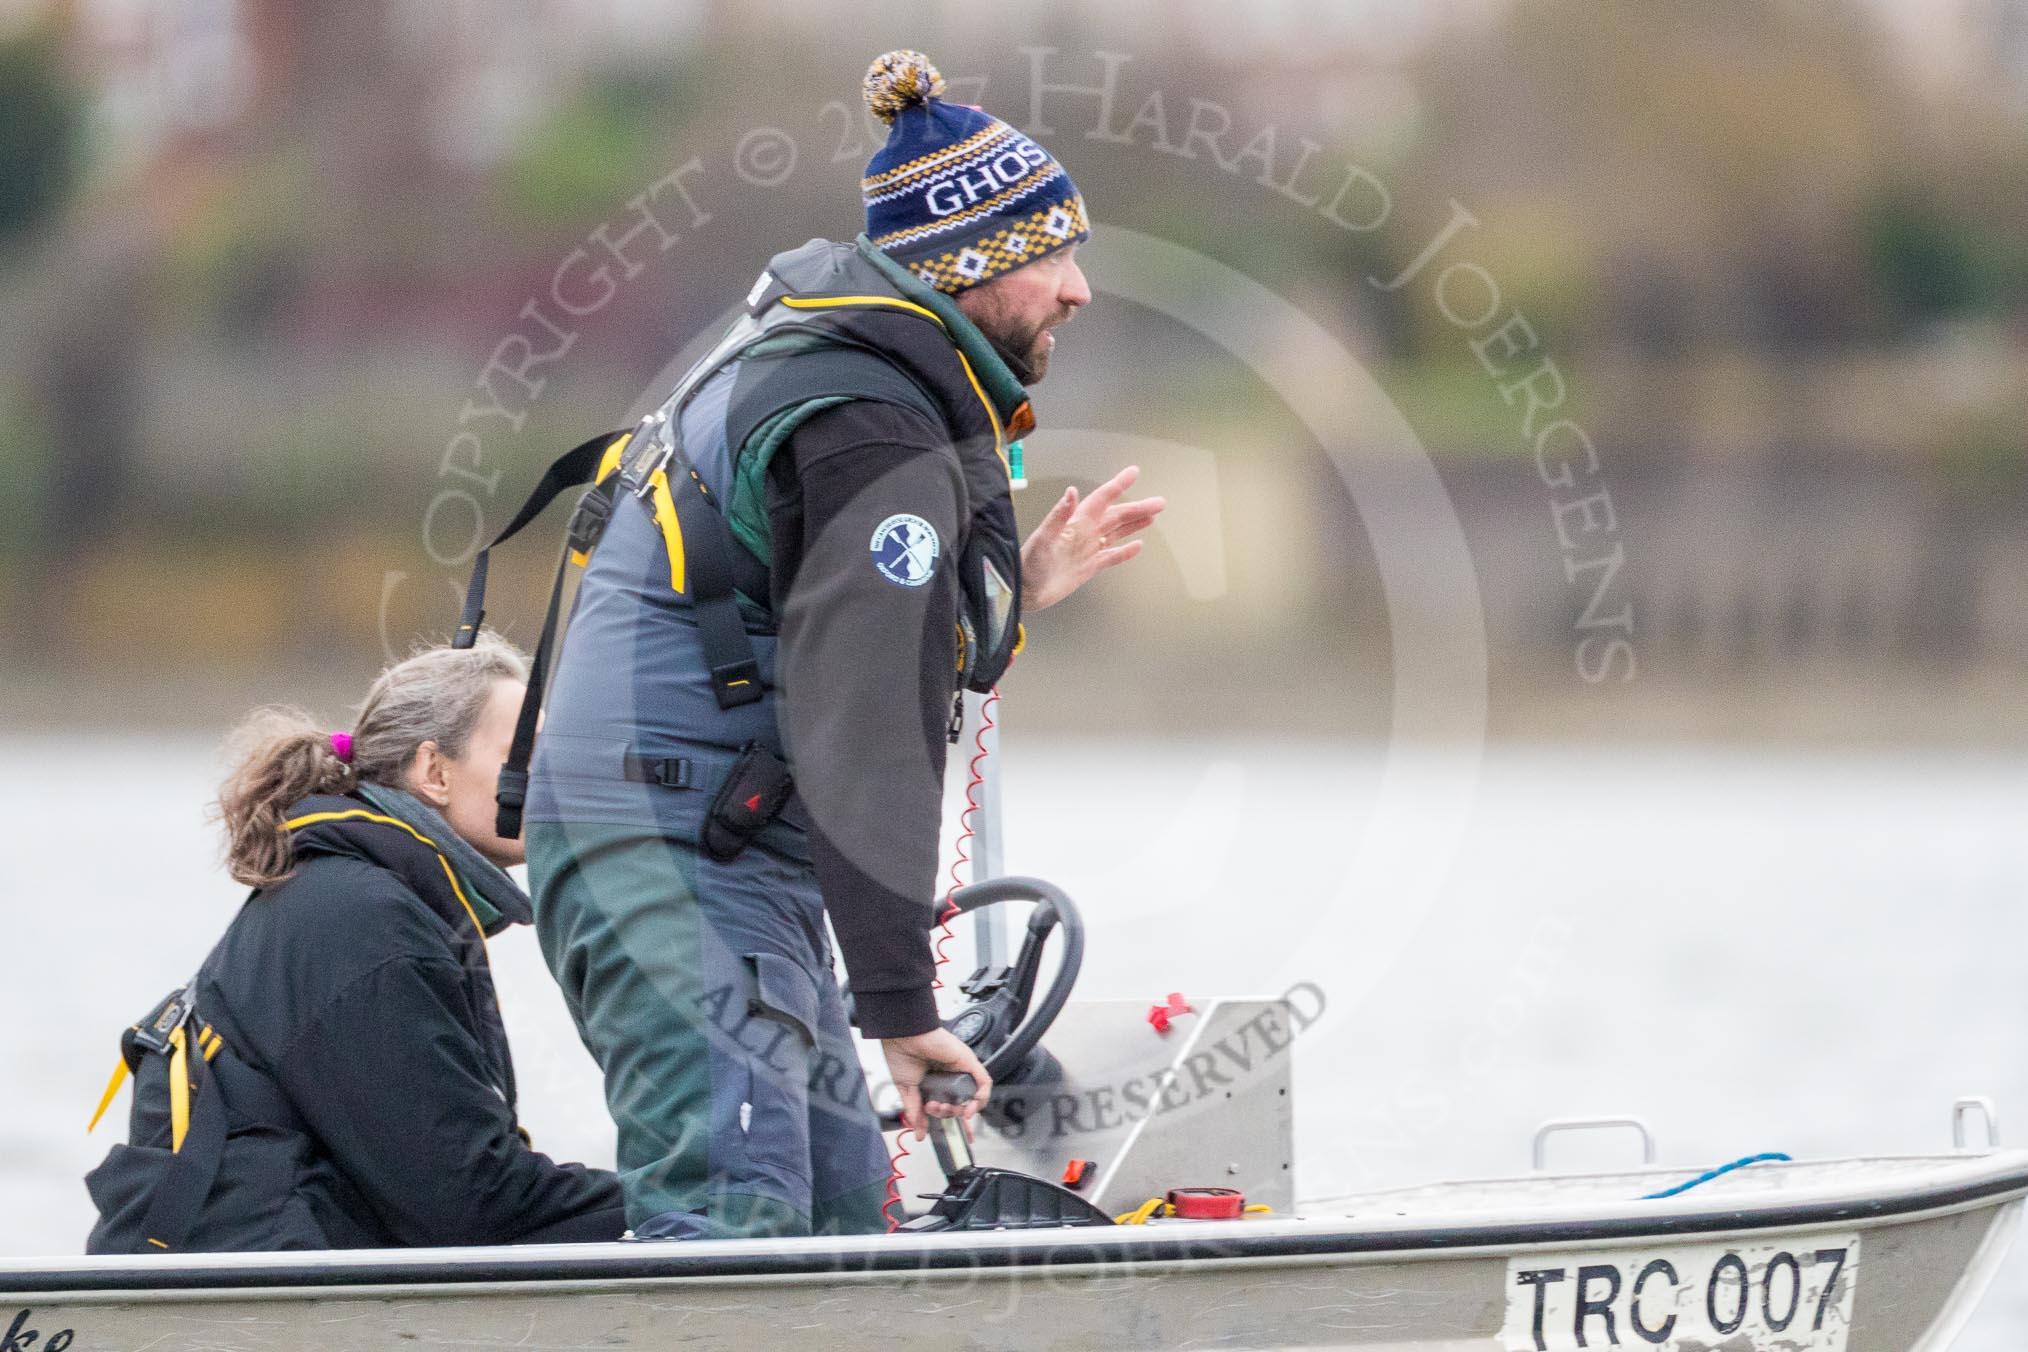 The Boat Race season 2017 - Women's Boat Race Fixture CUWBC vs Univerity of London: CUWBC coach Rob Baker in the tin boat during the debrief after the first part of the fixture.
River Thames between Putney Bridge and Mortlake,
London SW15,

United Kingdom,
on 19 February 2017 at 16:14, image #104